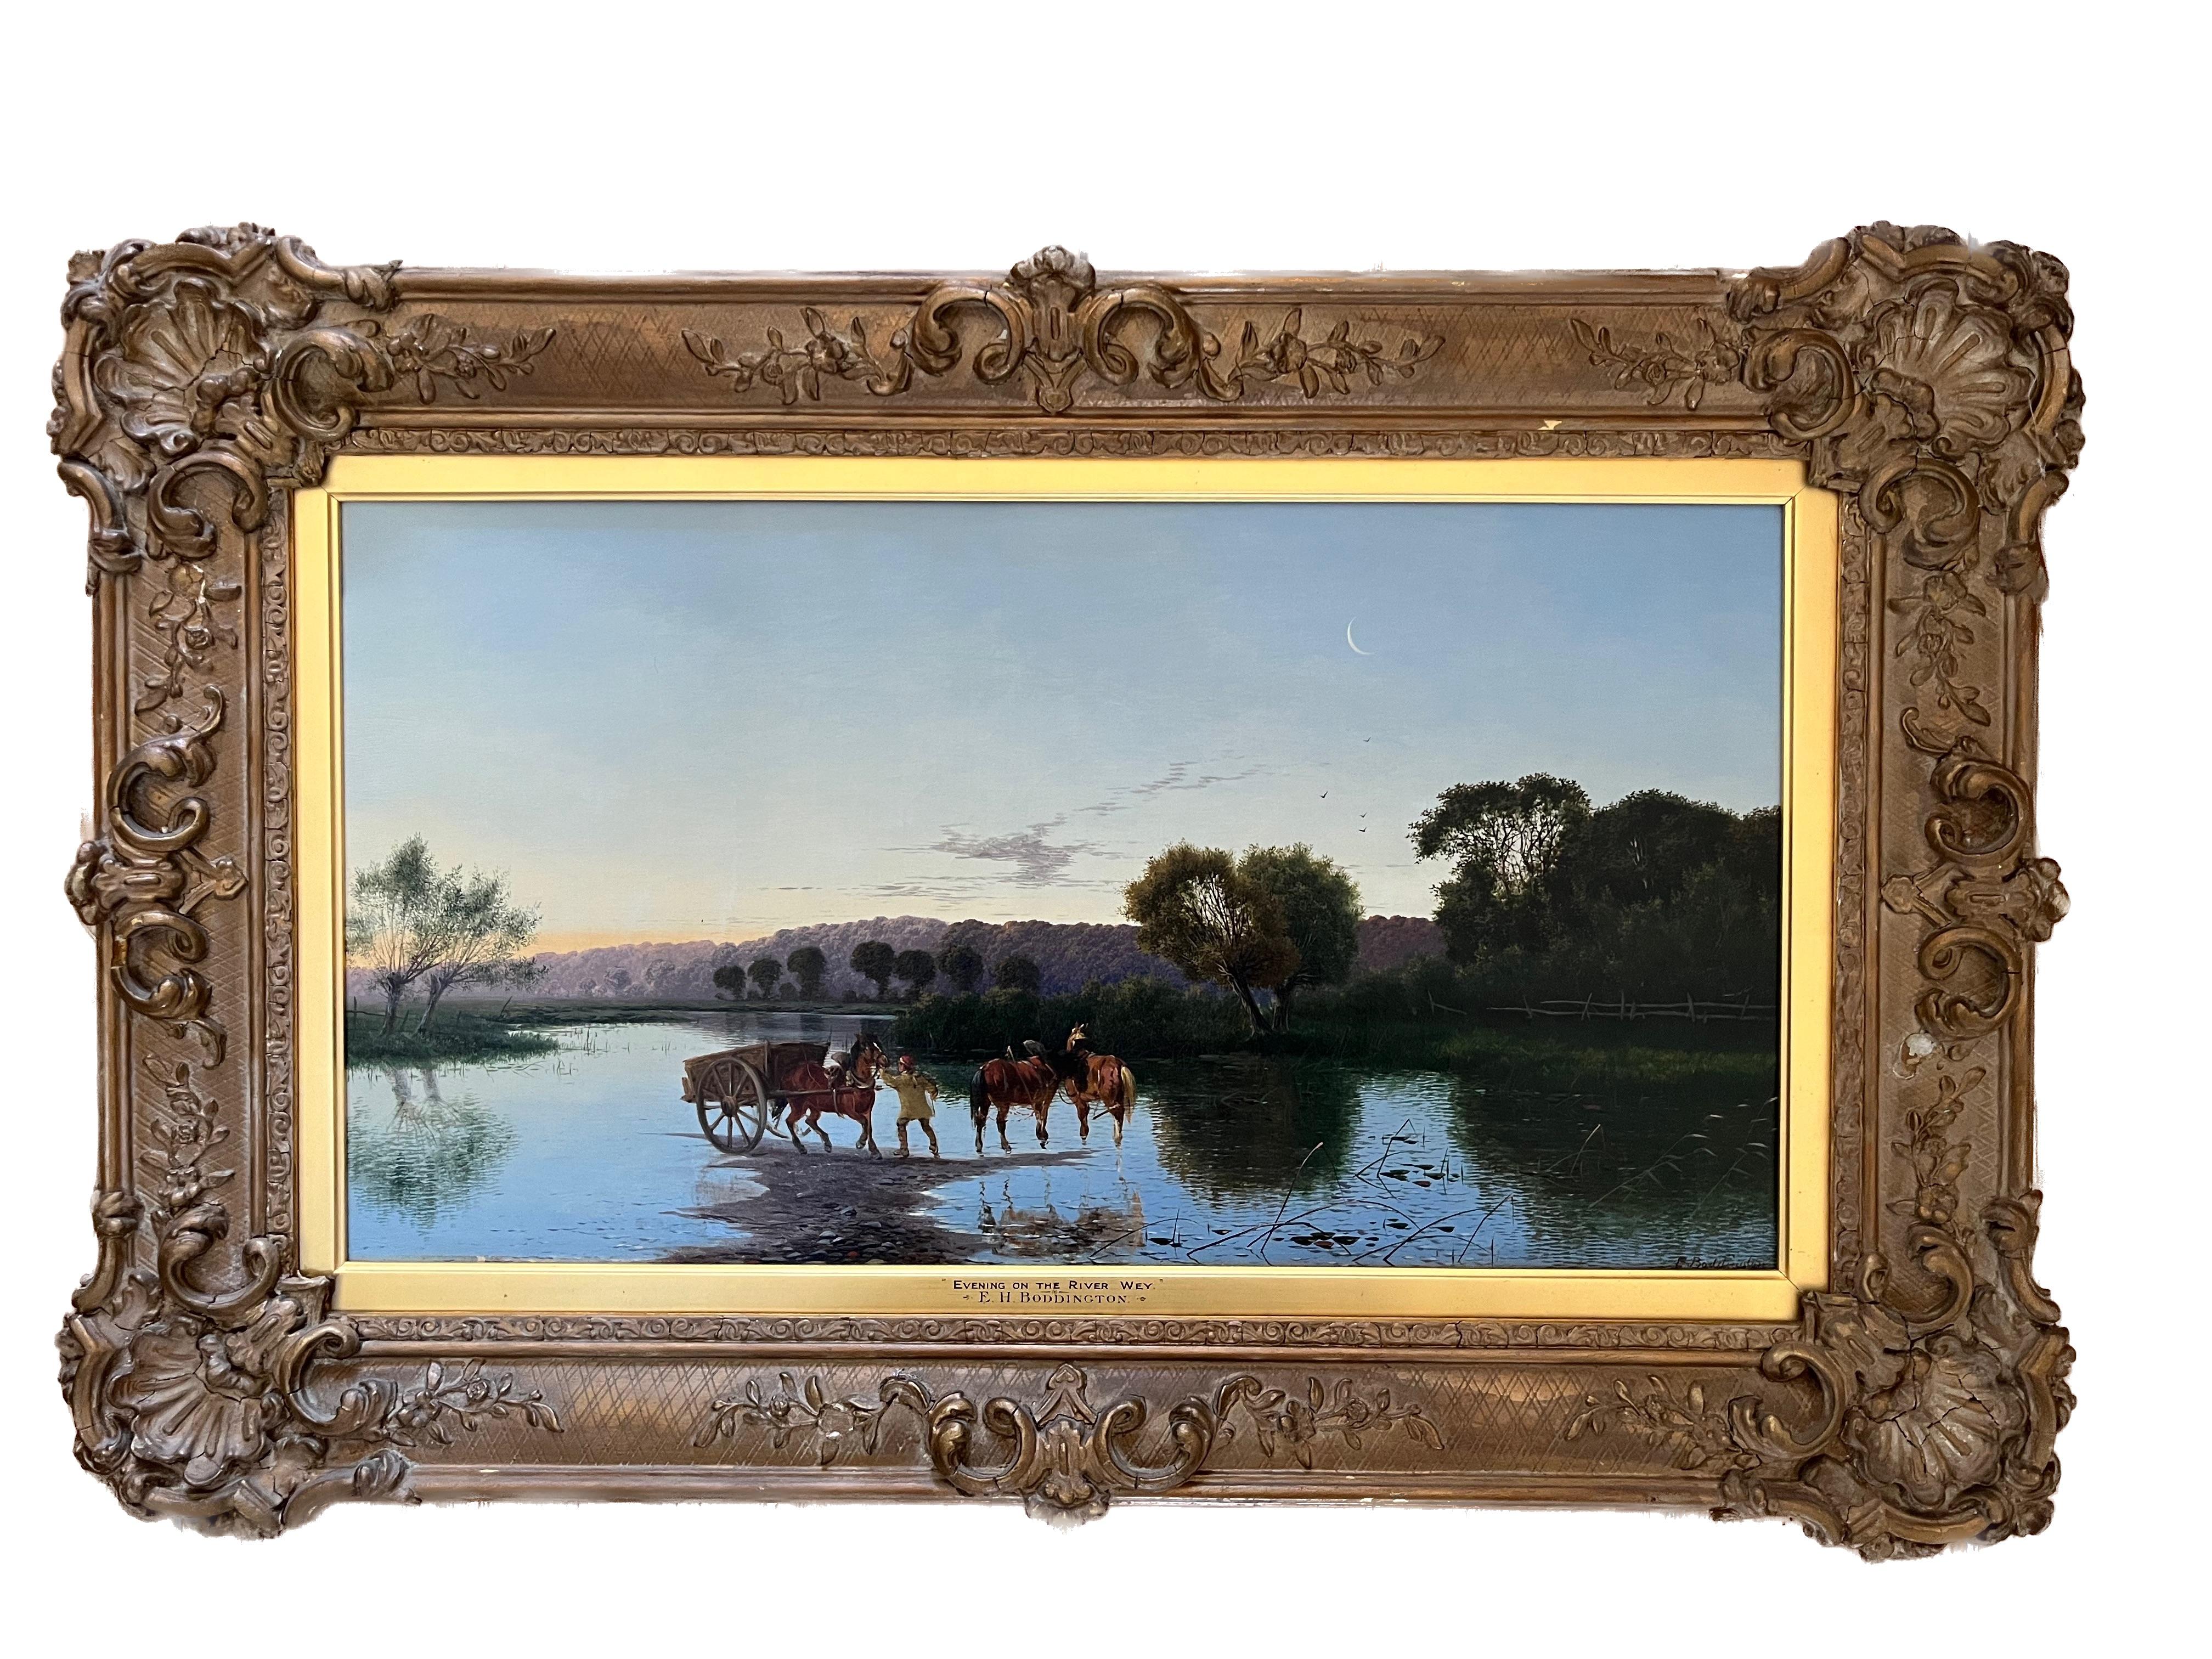 Victorian landscape painting of the River Thames with horses watering